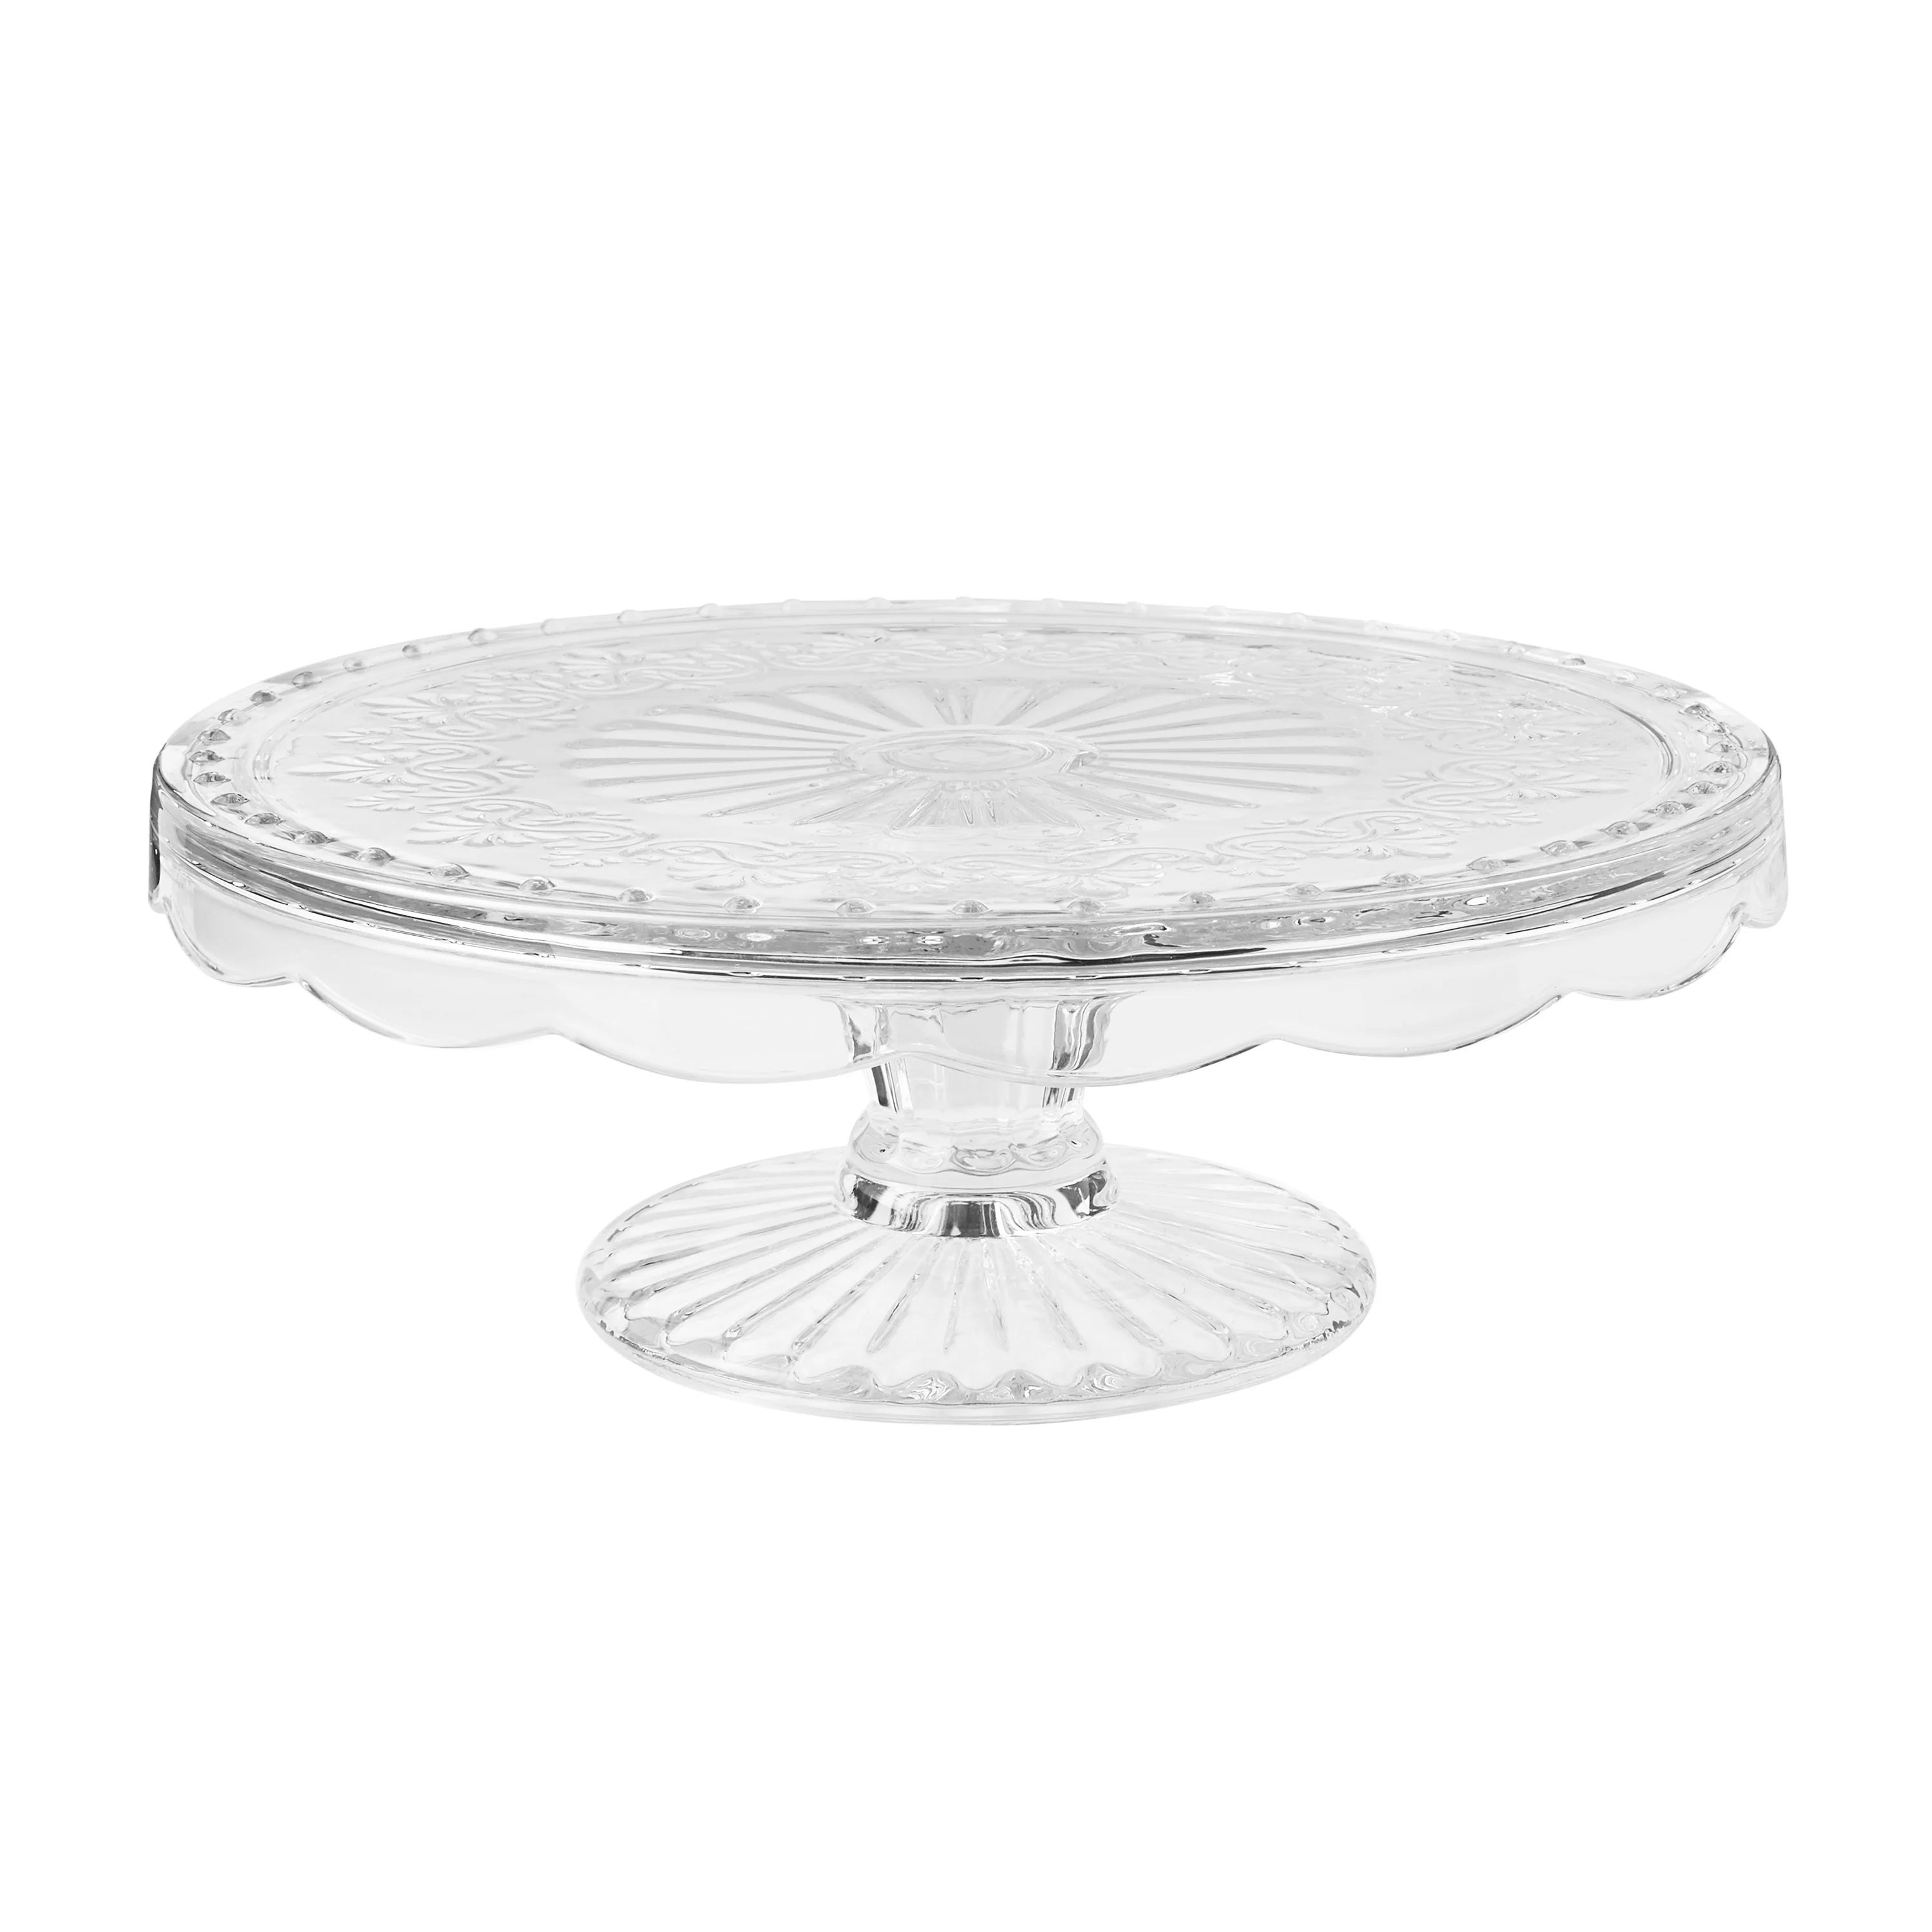 The Pioneer Woman 10.25 in Round Glass Cake Stand, Clear | Walmart (US)